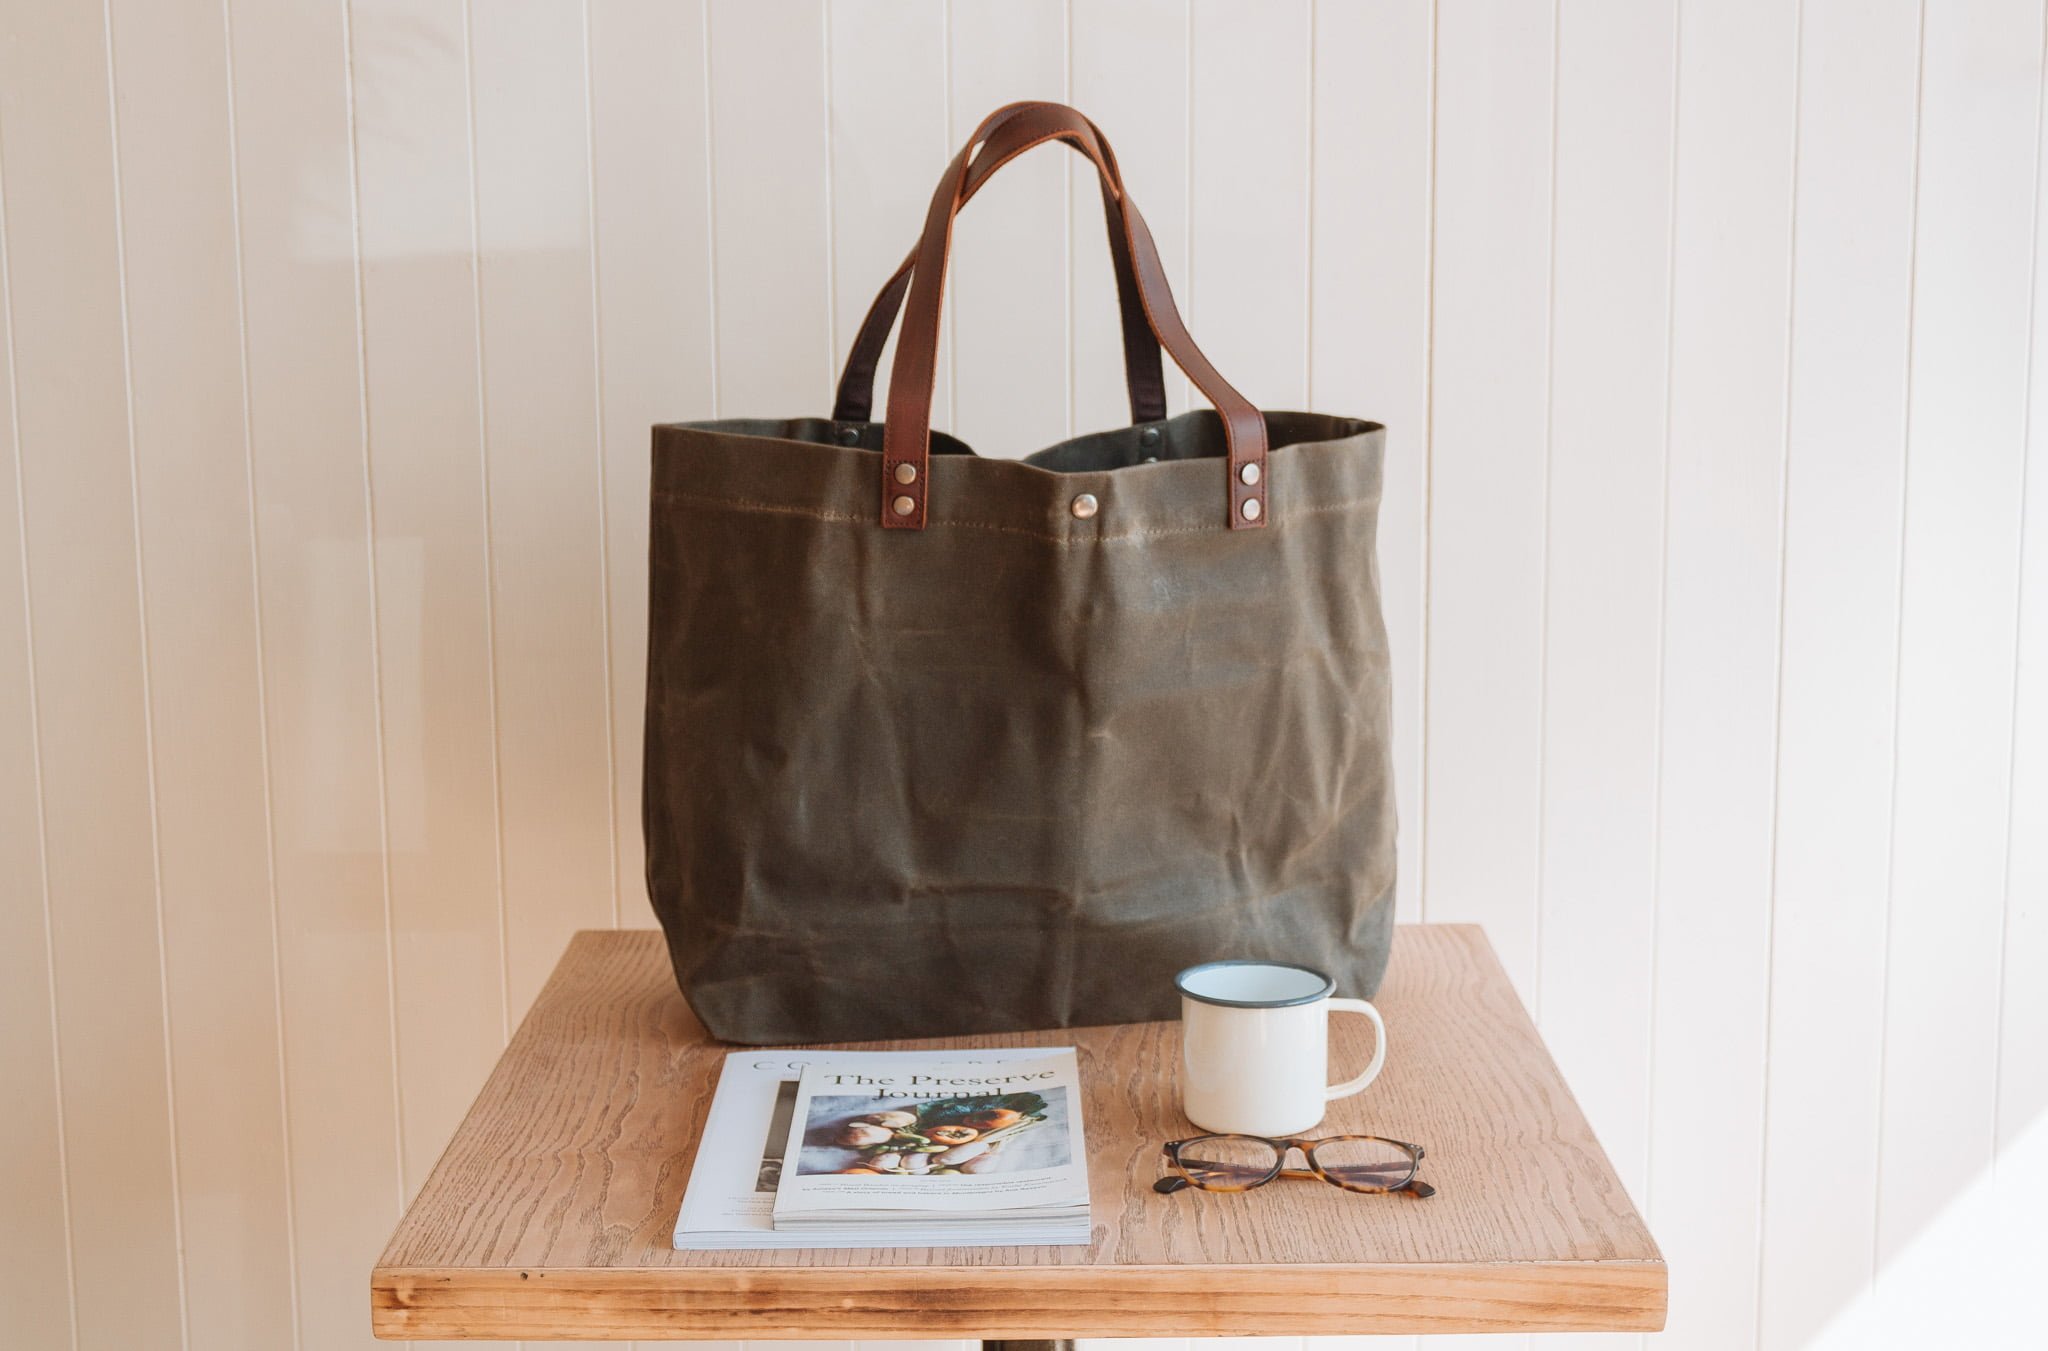 Waxed Cotton Canvas and Leather Tote Bag - Rugged Weatherproof Shoulder Hand Bag Tote - The Brierley Tote in Moss Green by Oldfield